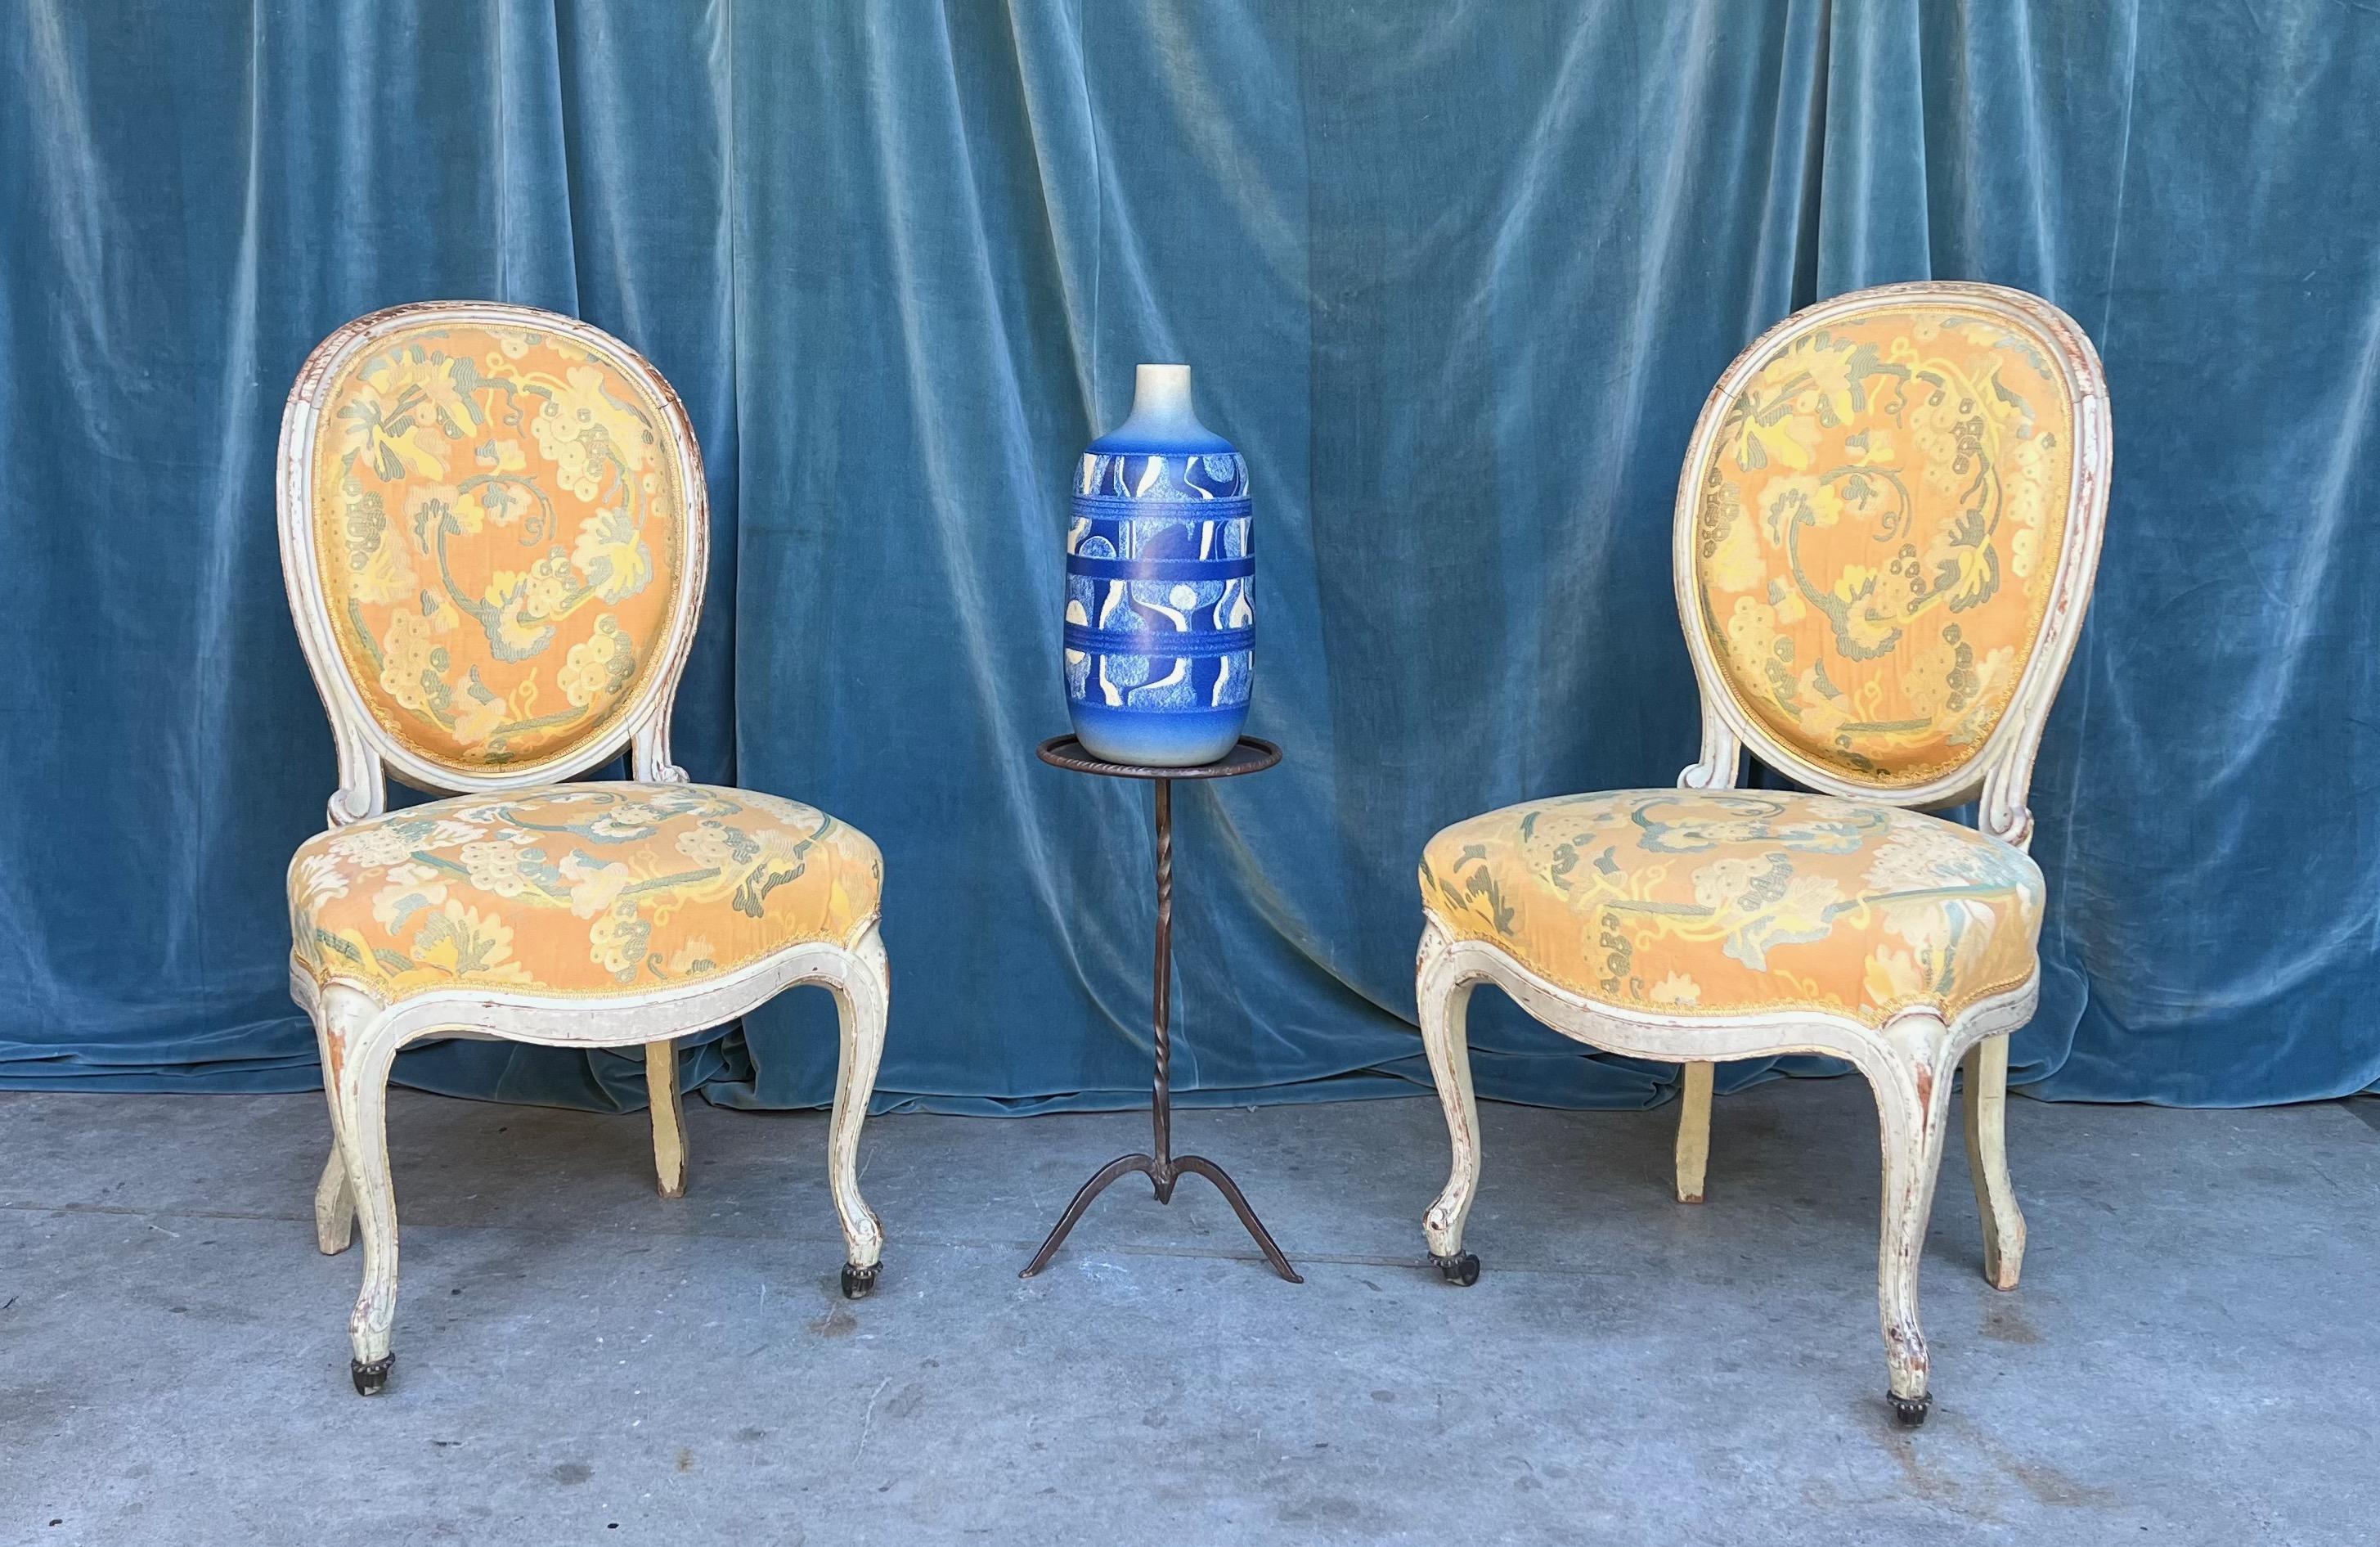 A beautiful pair of Louis XV style side chairs in yellow patterned fabric with white painted frames with traces of gilt. This stunning pair of Louis XV style side chairs will add a touch of elegance and sophistication to any room. The yellow